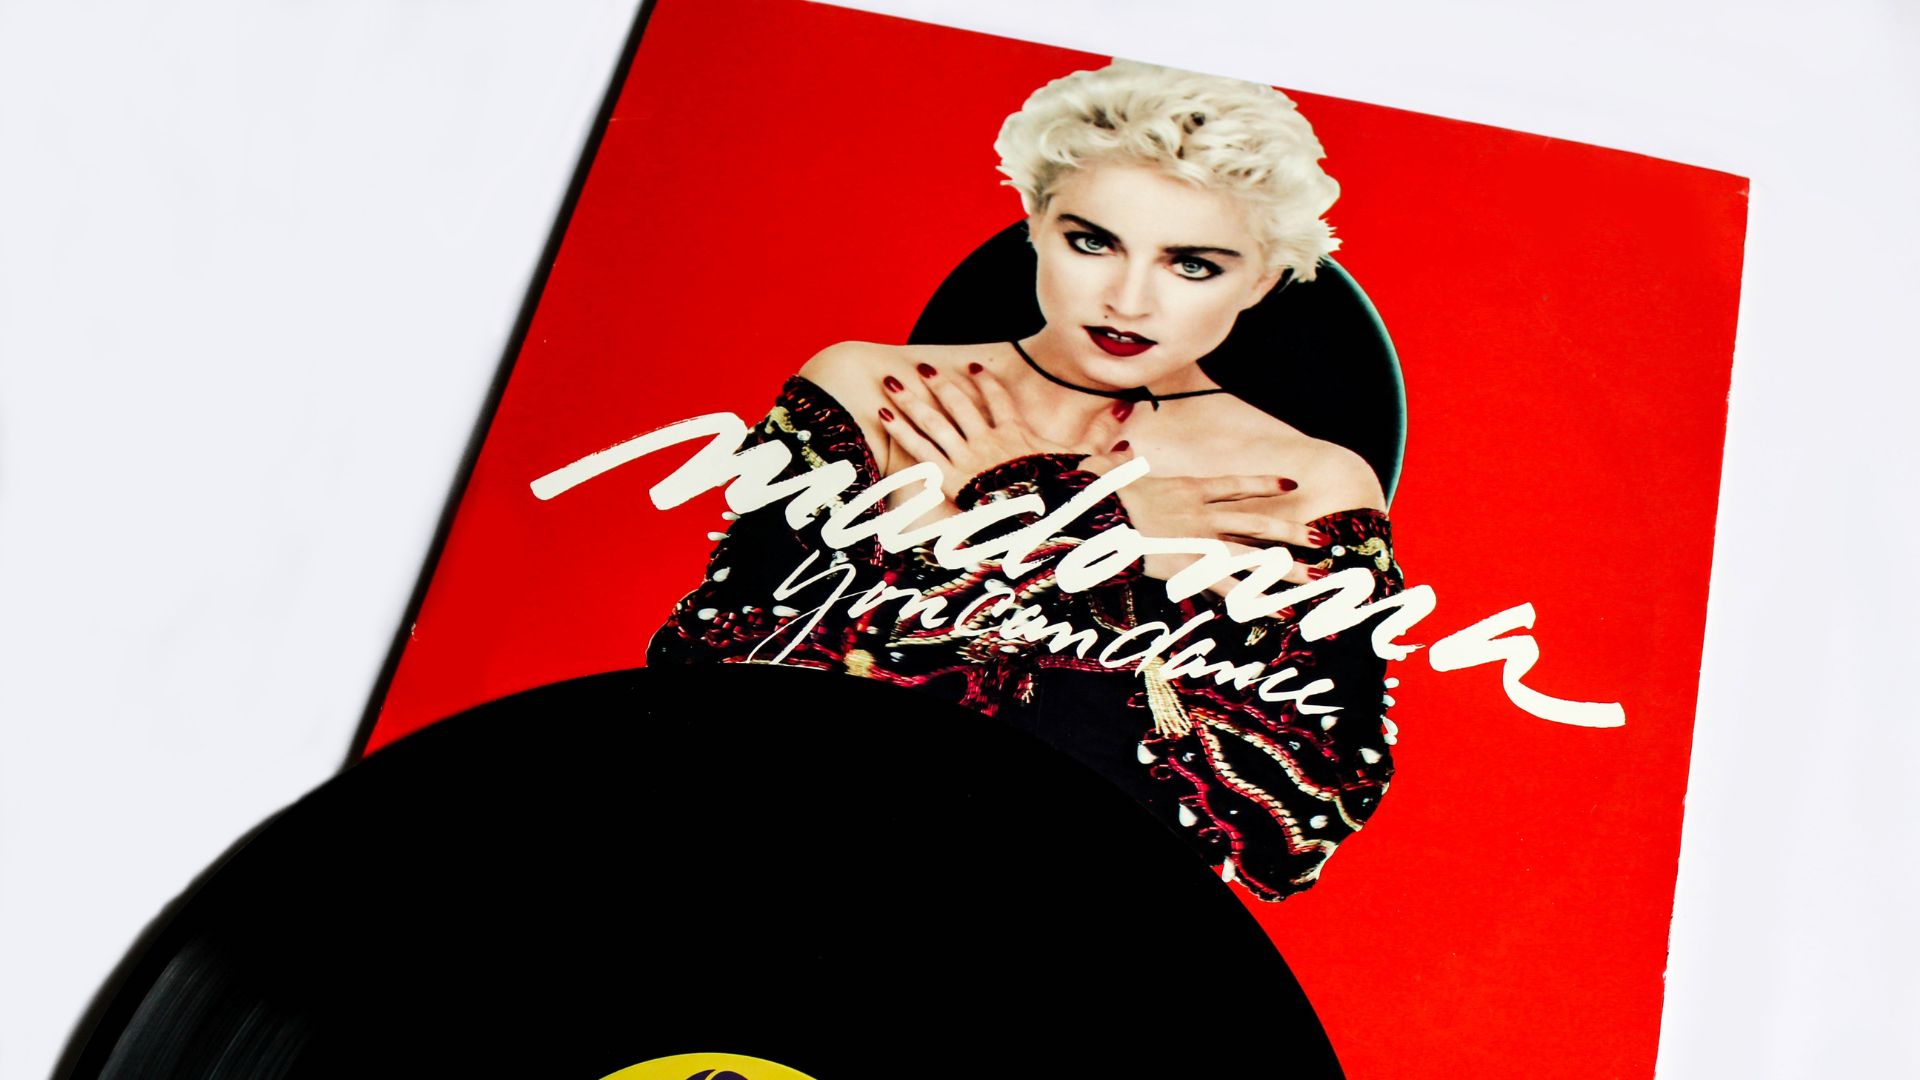 Miami, FL, USA; June 2021: Pop and House dance artist, Madonna remix music album on vinyl record LP disc. Titled: You can dance album cover